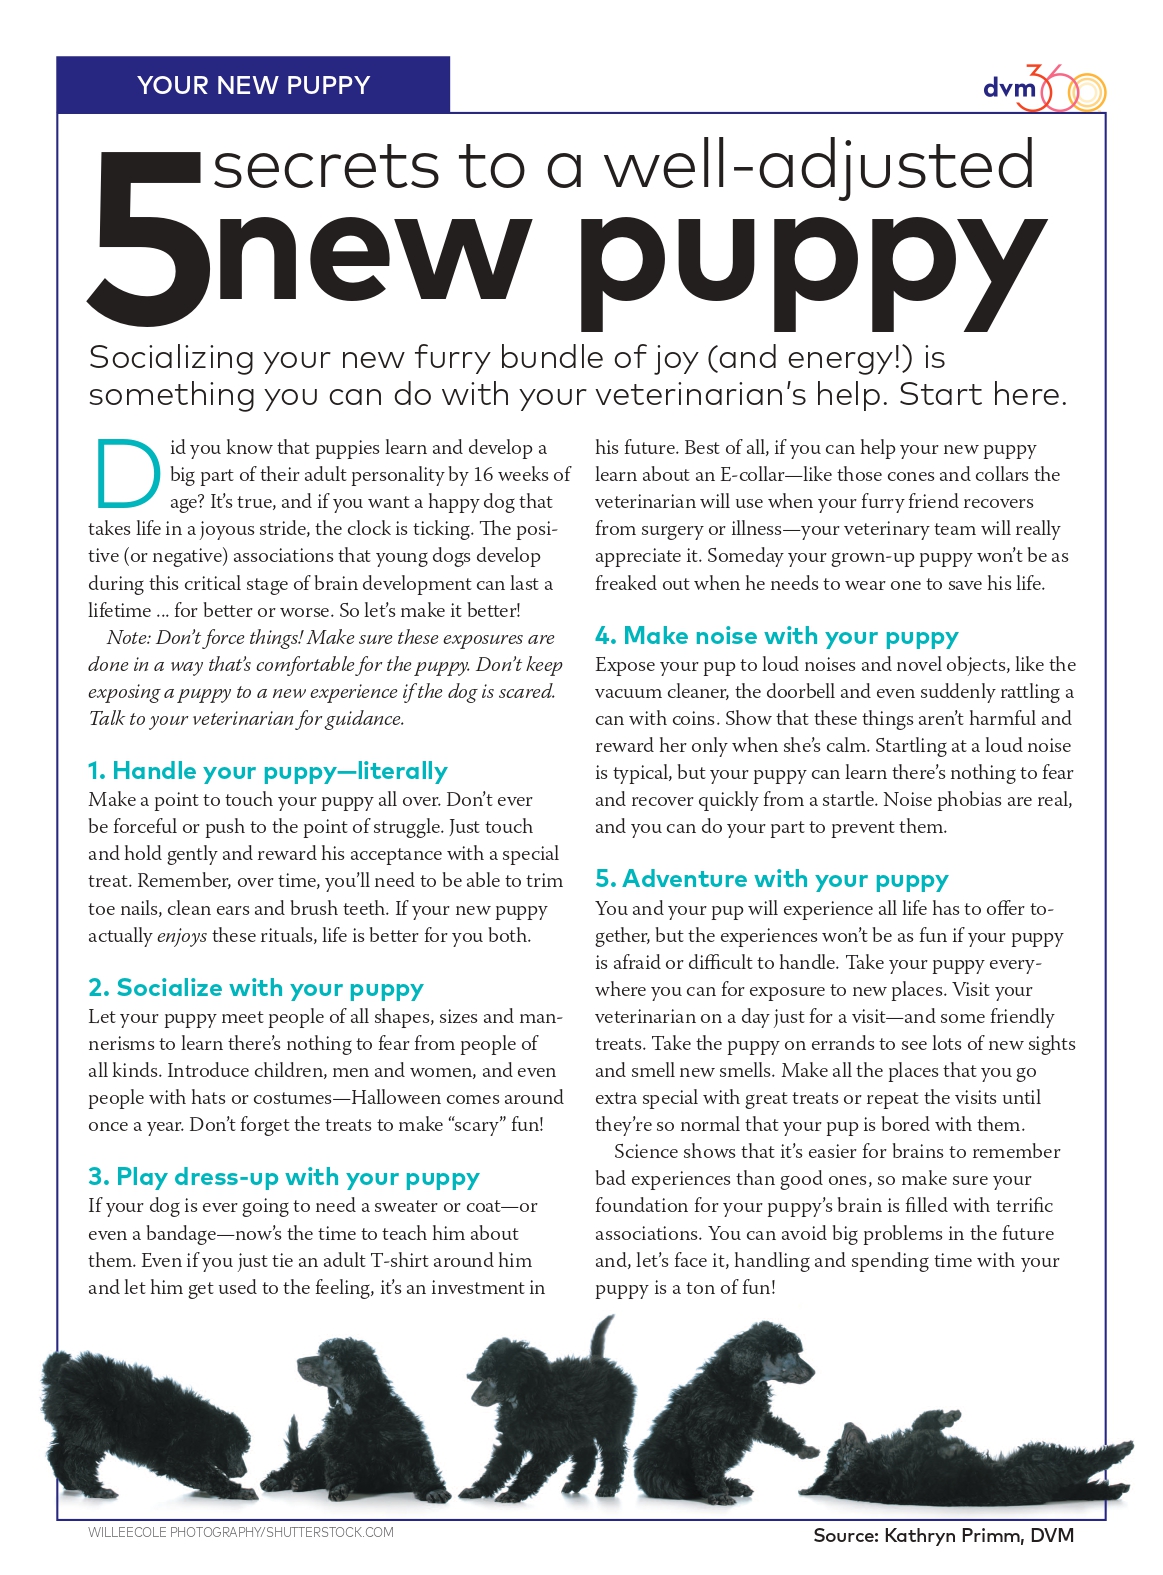 5 Secrets to a well-adjusted new puppy